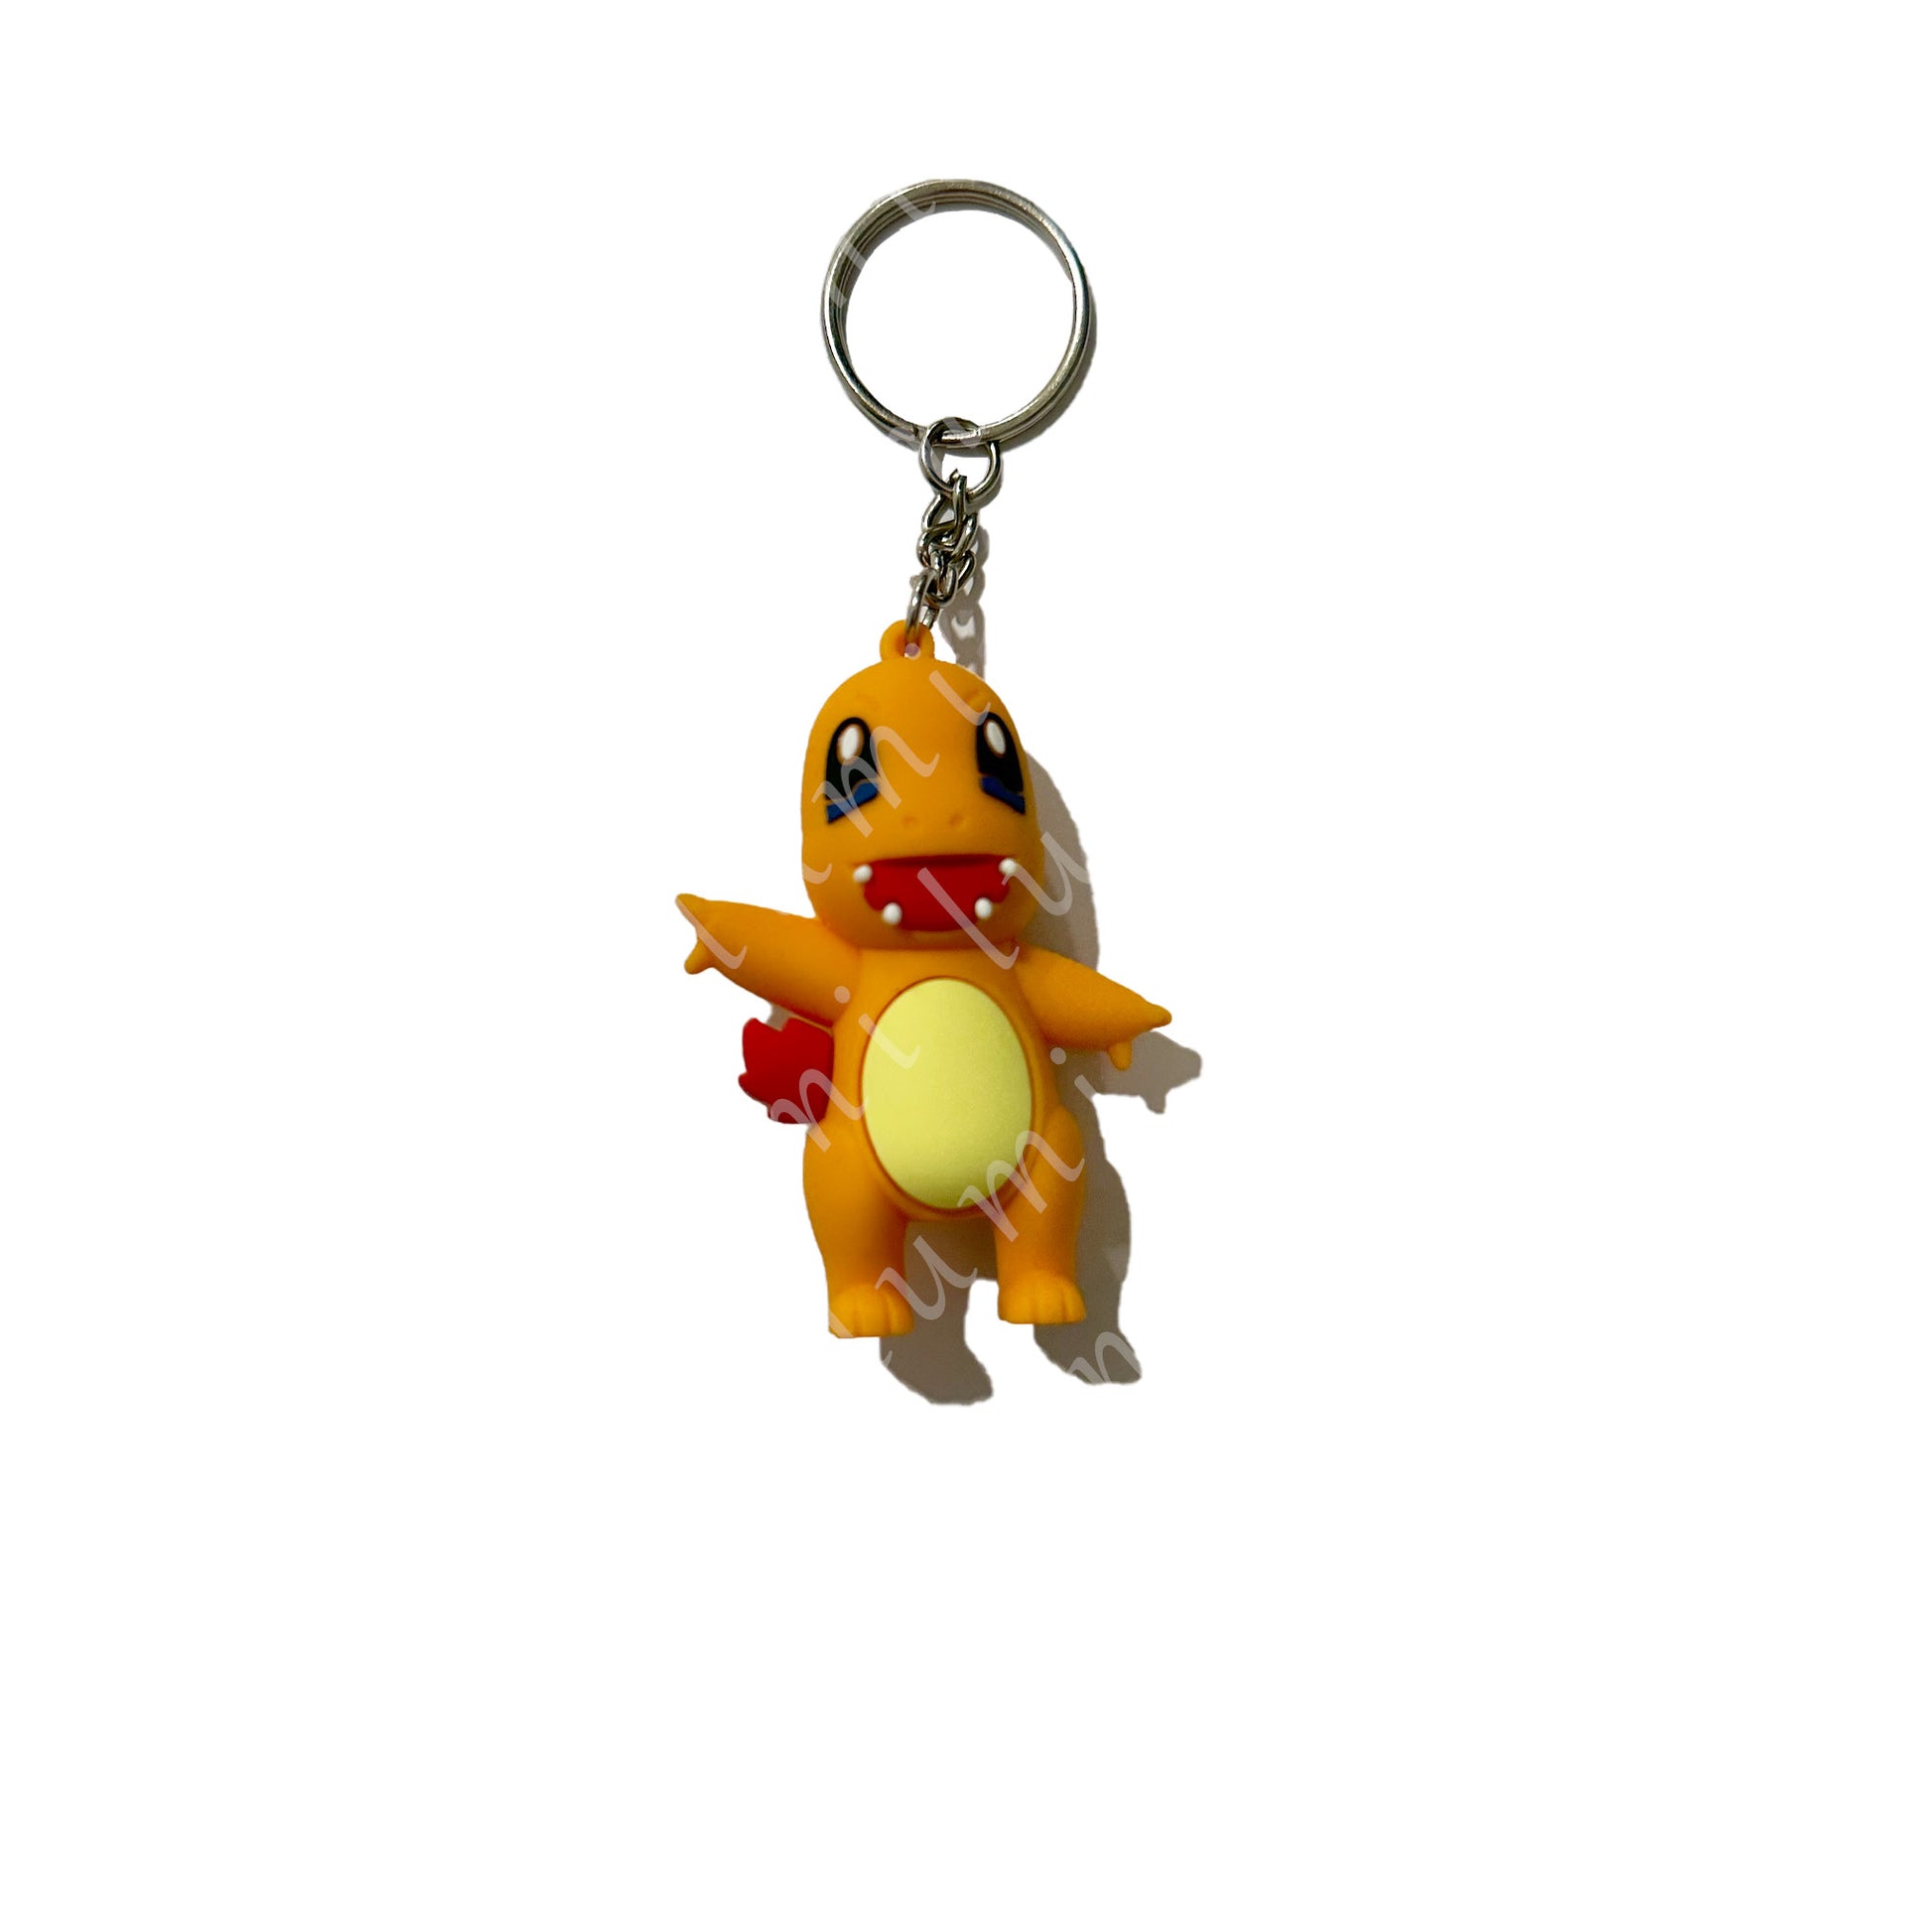 Image of a cute Charmandar Keychain, a perfect Pokémon-inspired accessory for your keys.